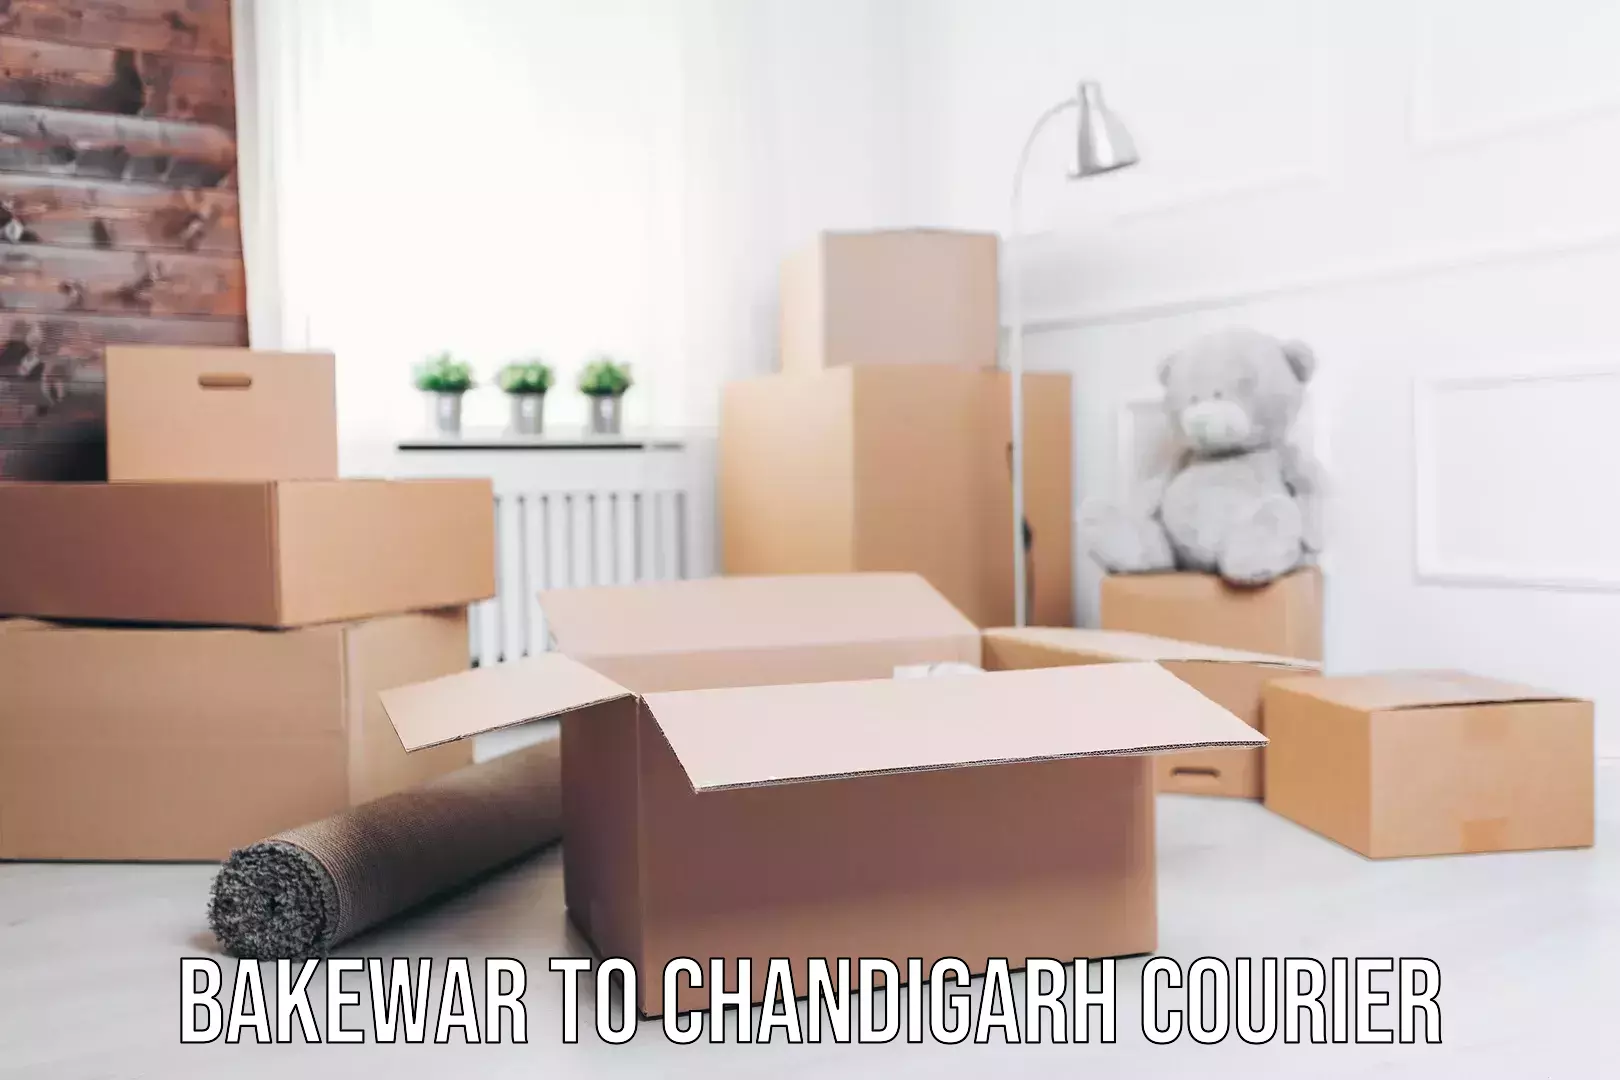 24-hour delivery options Bakewar to Chandigarh